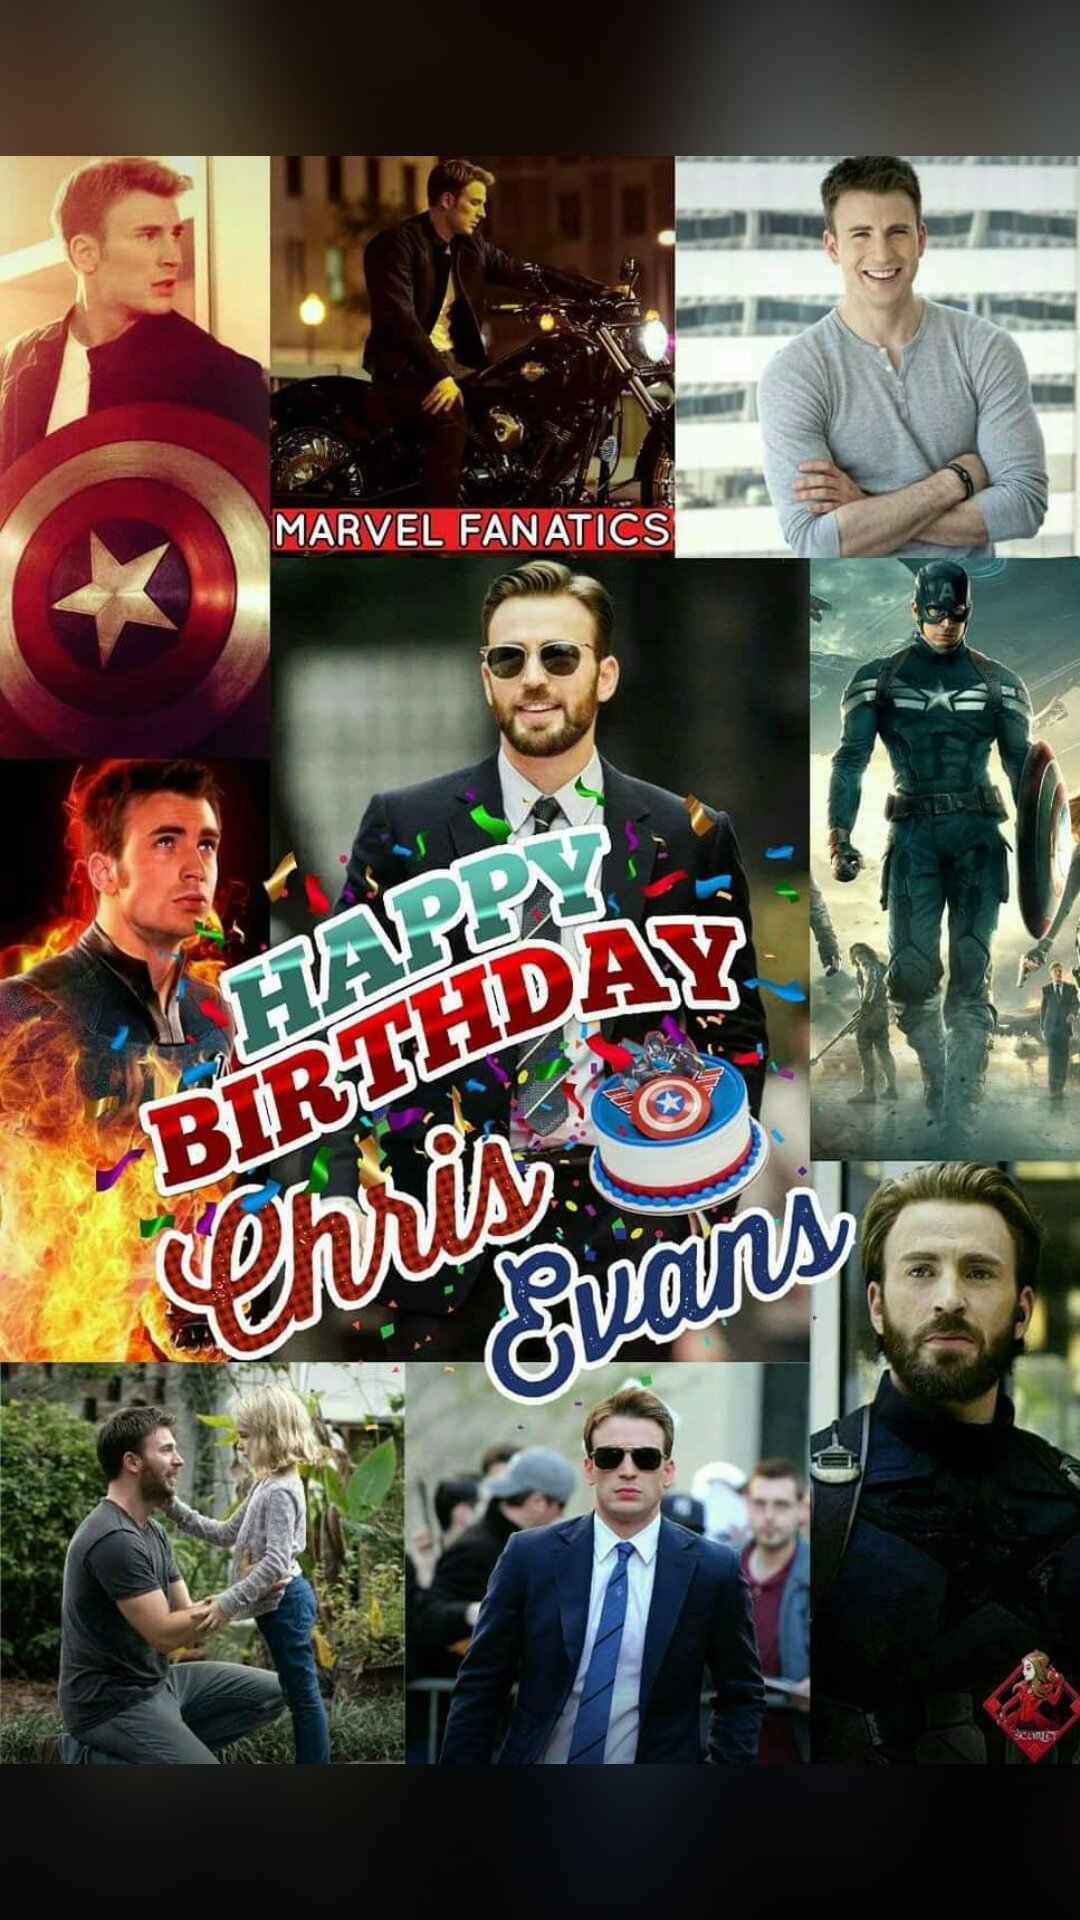 A very very happy birthday Chris Evans
Thanks for being the reason to watch Marvel 